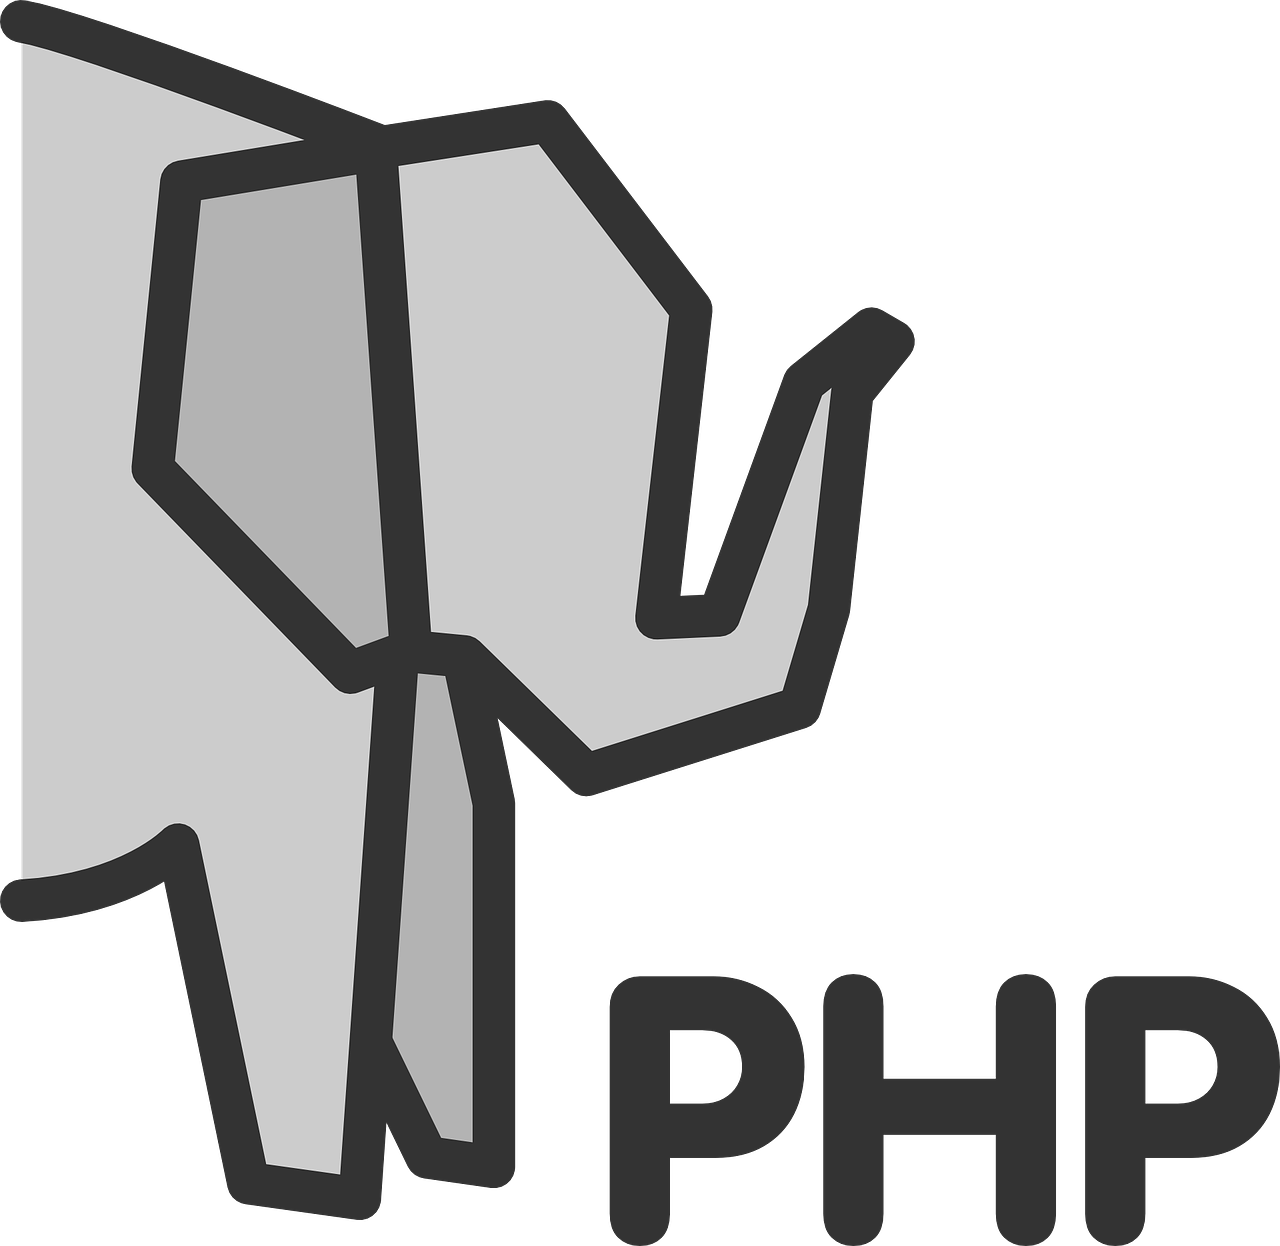 Server related things for PHP Developers